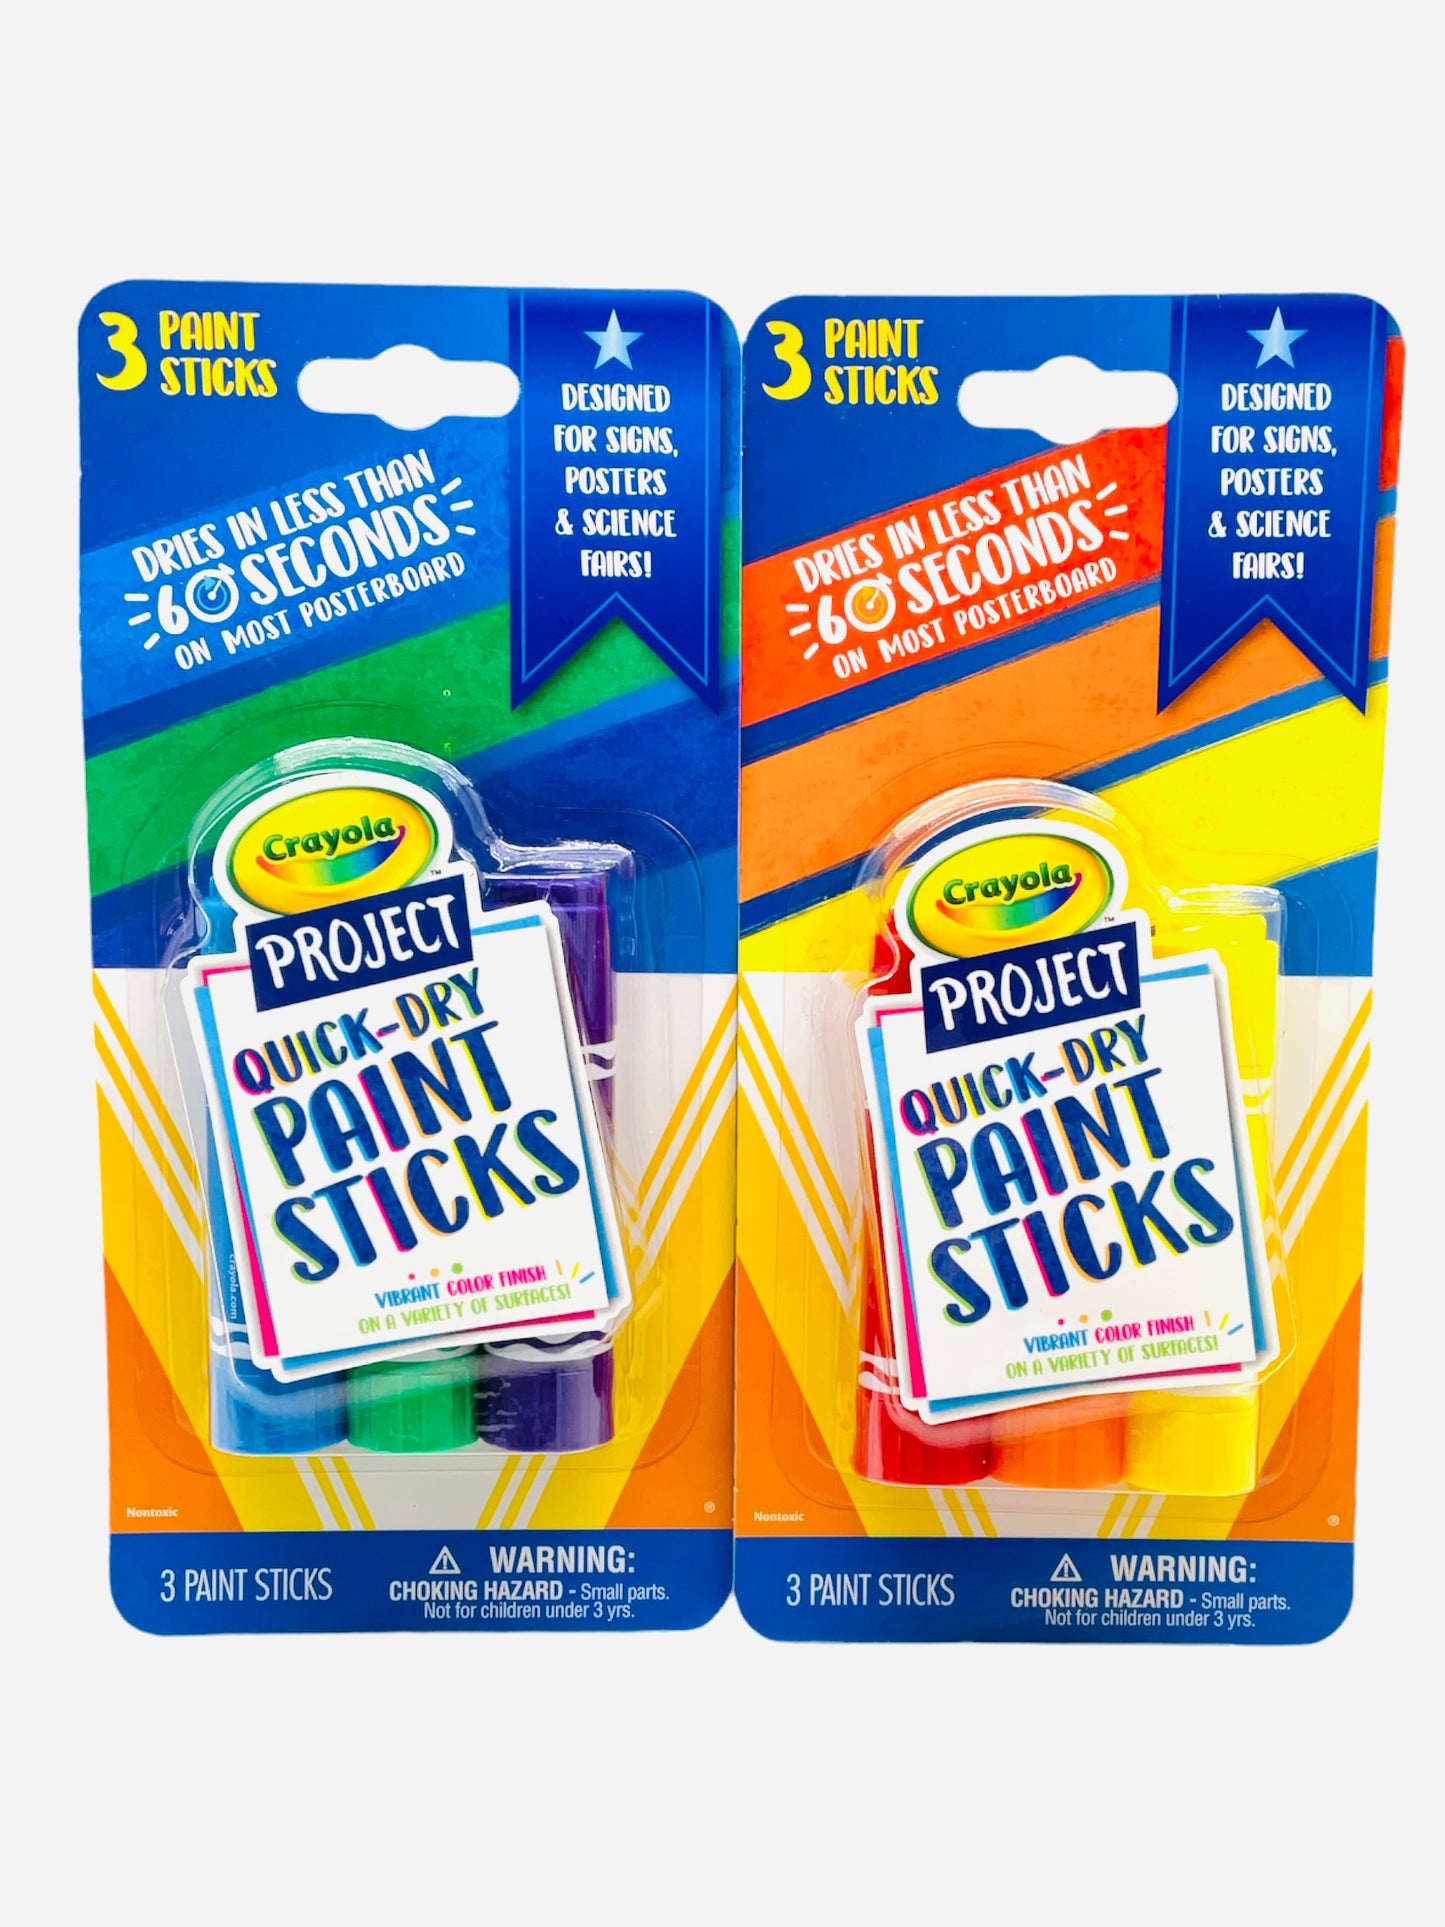 Crayola Project Quick-Dry Paint Sticks (1 Pack Colors May Vary Chosen at Random)